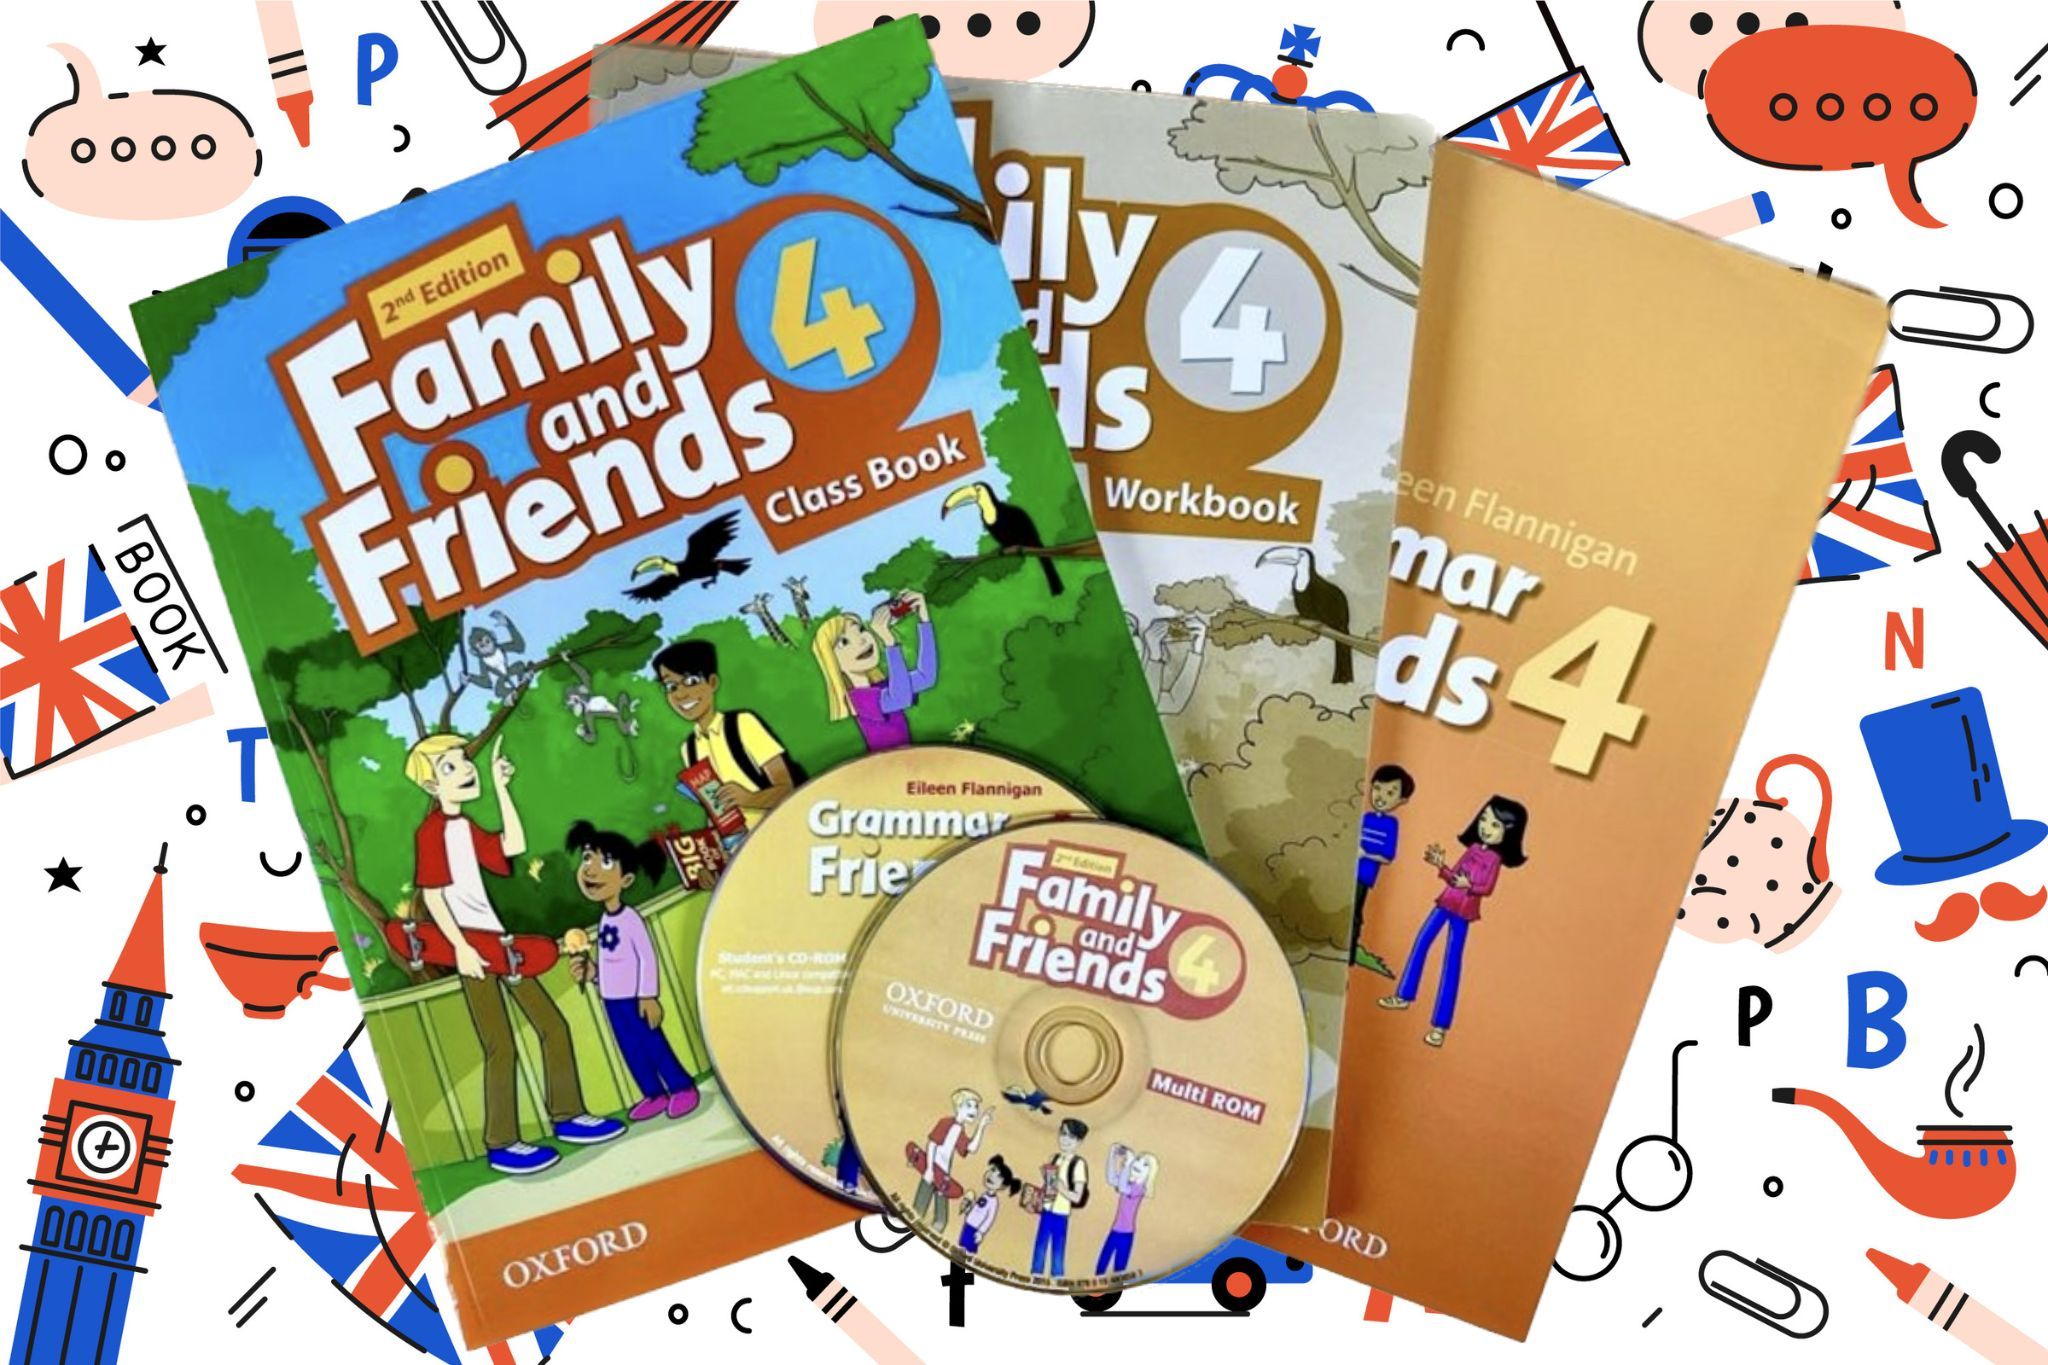 Family and friends 4 2nd edition workbook. Famly ang friends 4 Workbook. Пьюплс бук 4 класс. Family and friends 4 Workbook ответы Unit 4. Family and friends 2nd Edition Workbook ответы к заданиям.